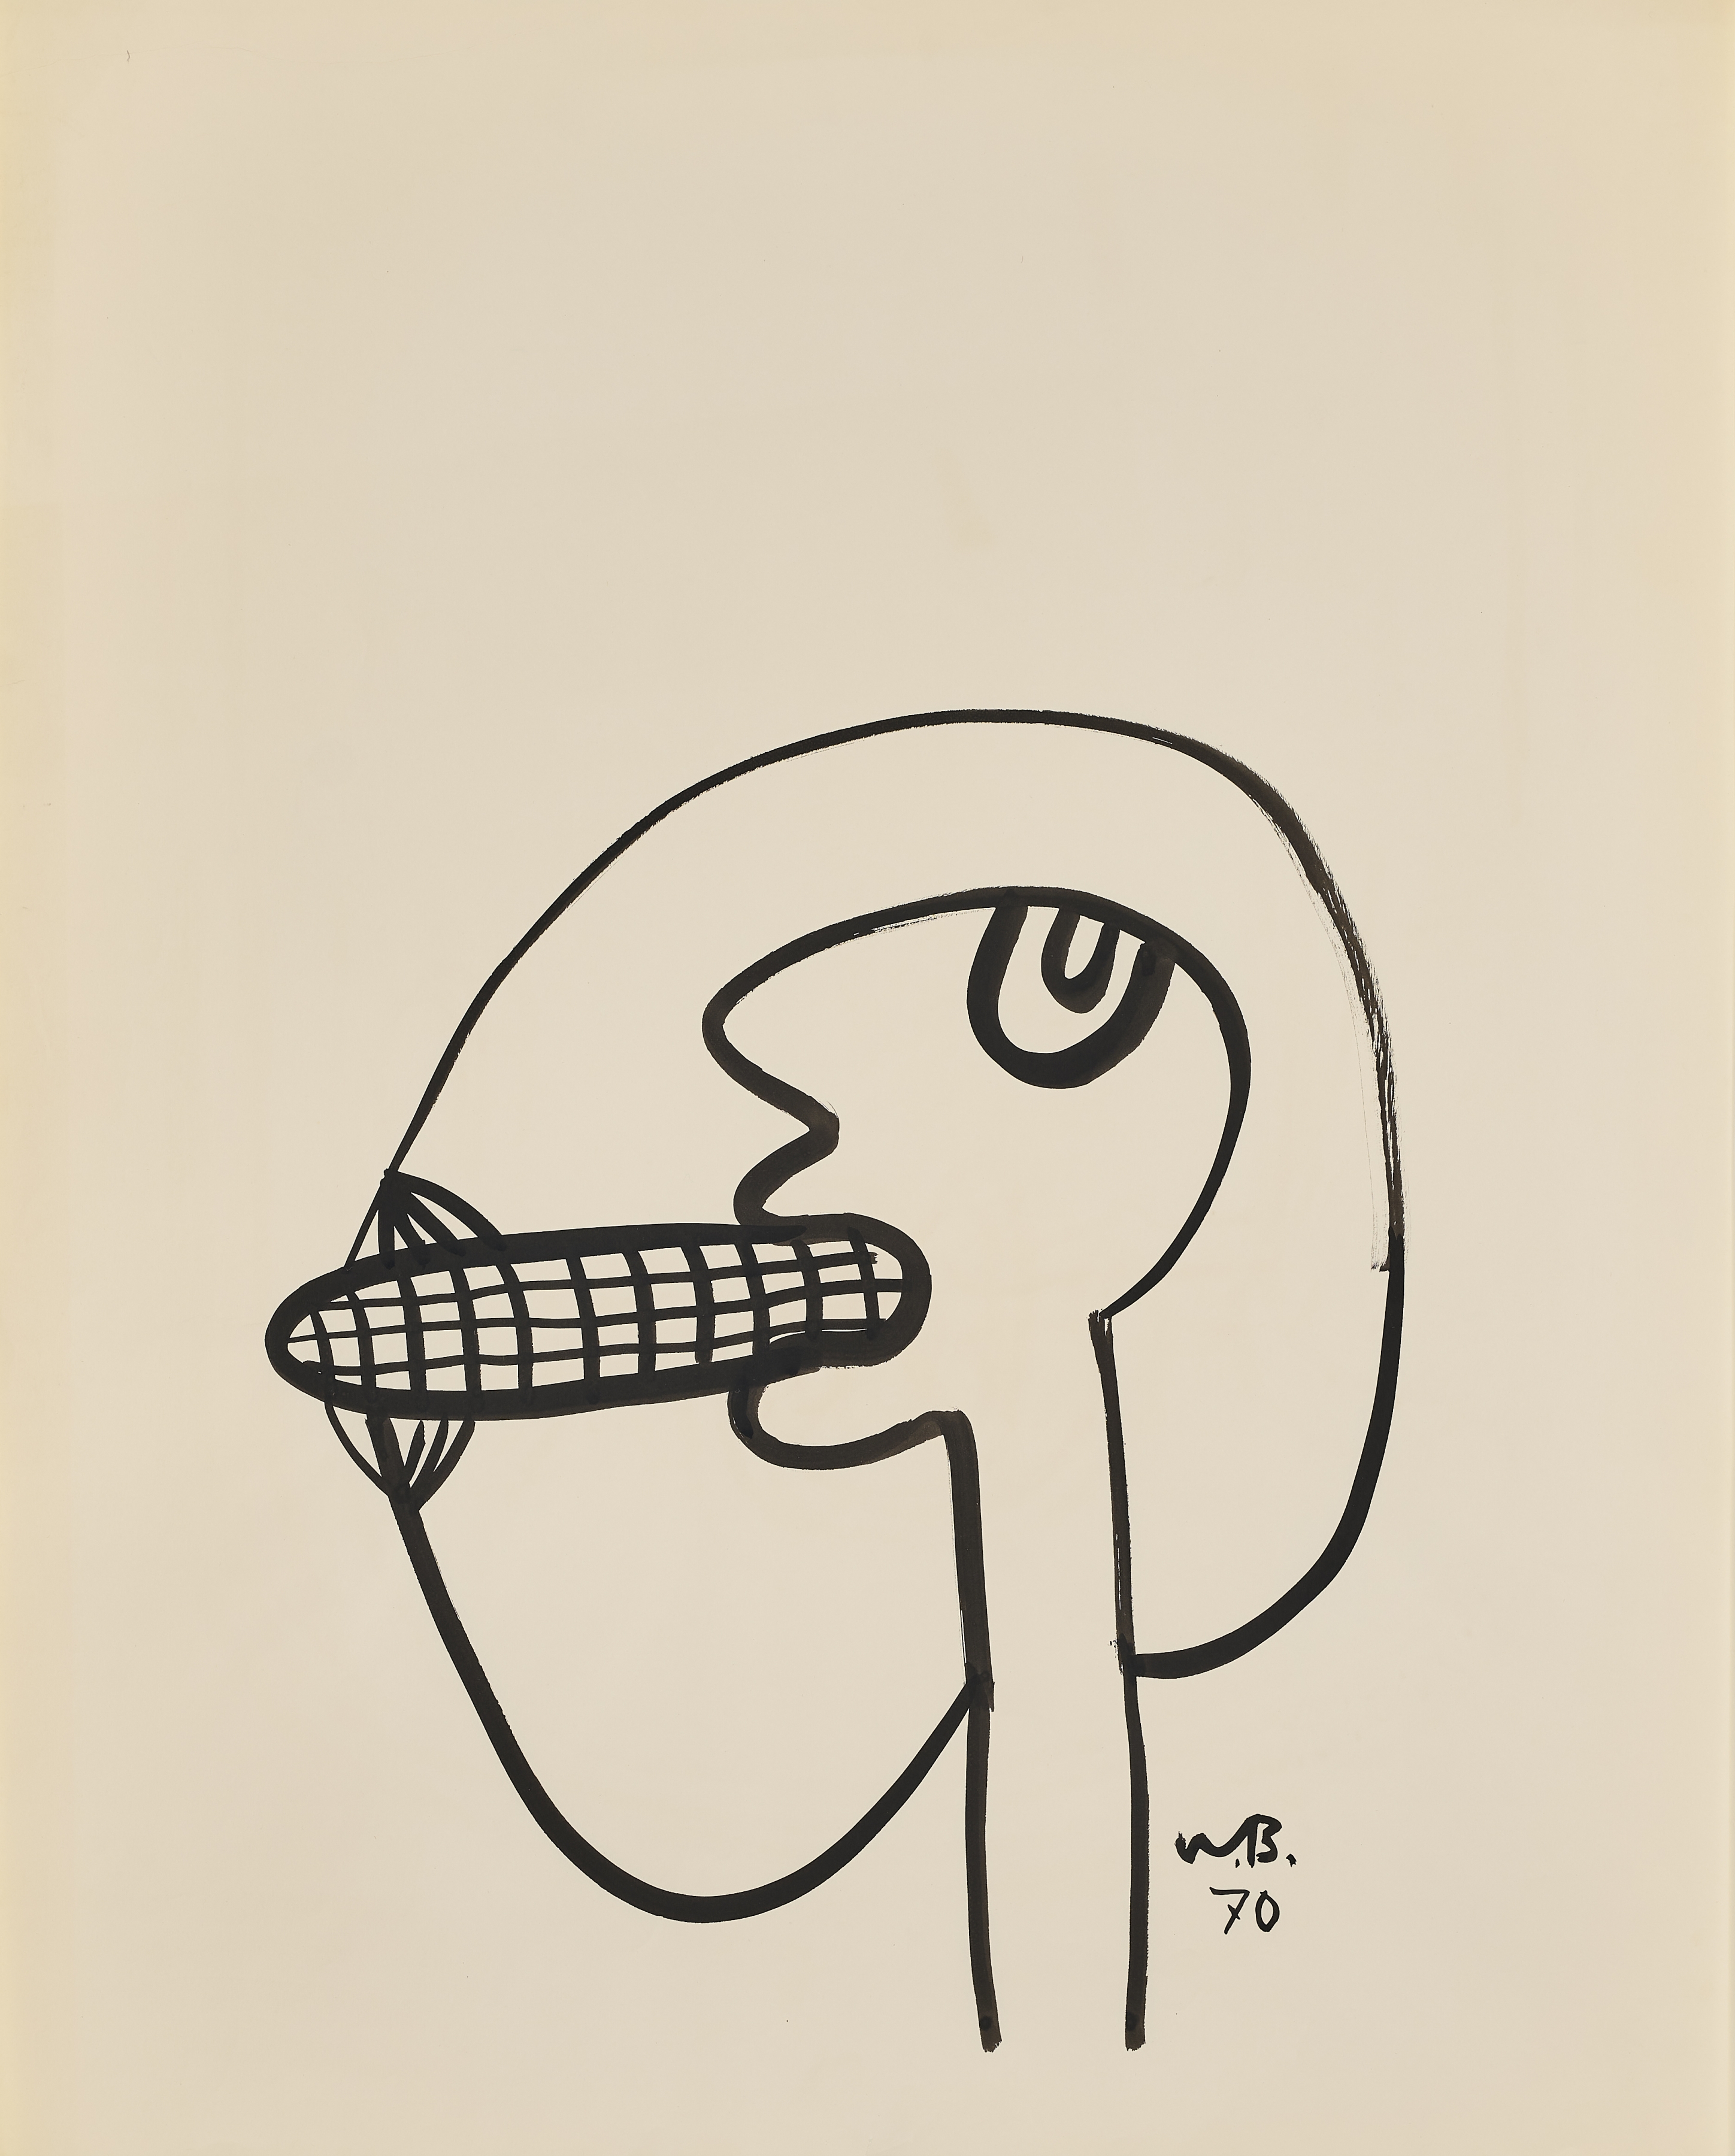 Walter Battiss

Untitled (mielie eater), 1970

Ink on paper

80 x 64 cm (31.5 x 25.2 in)

Enquire